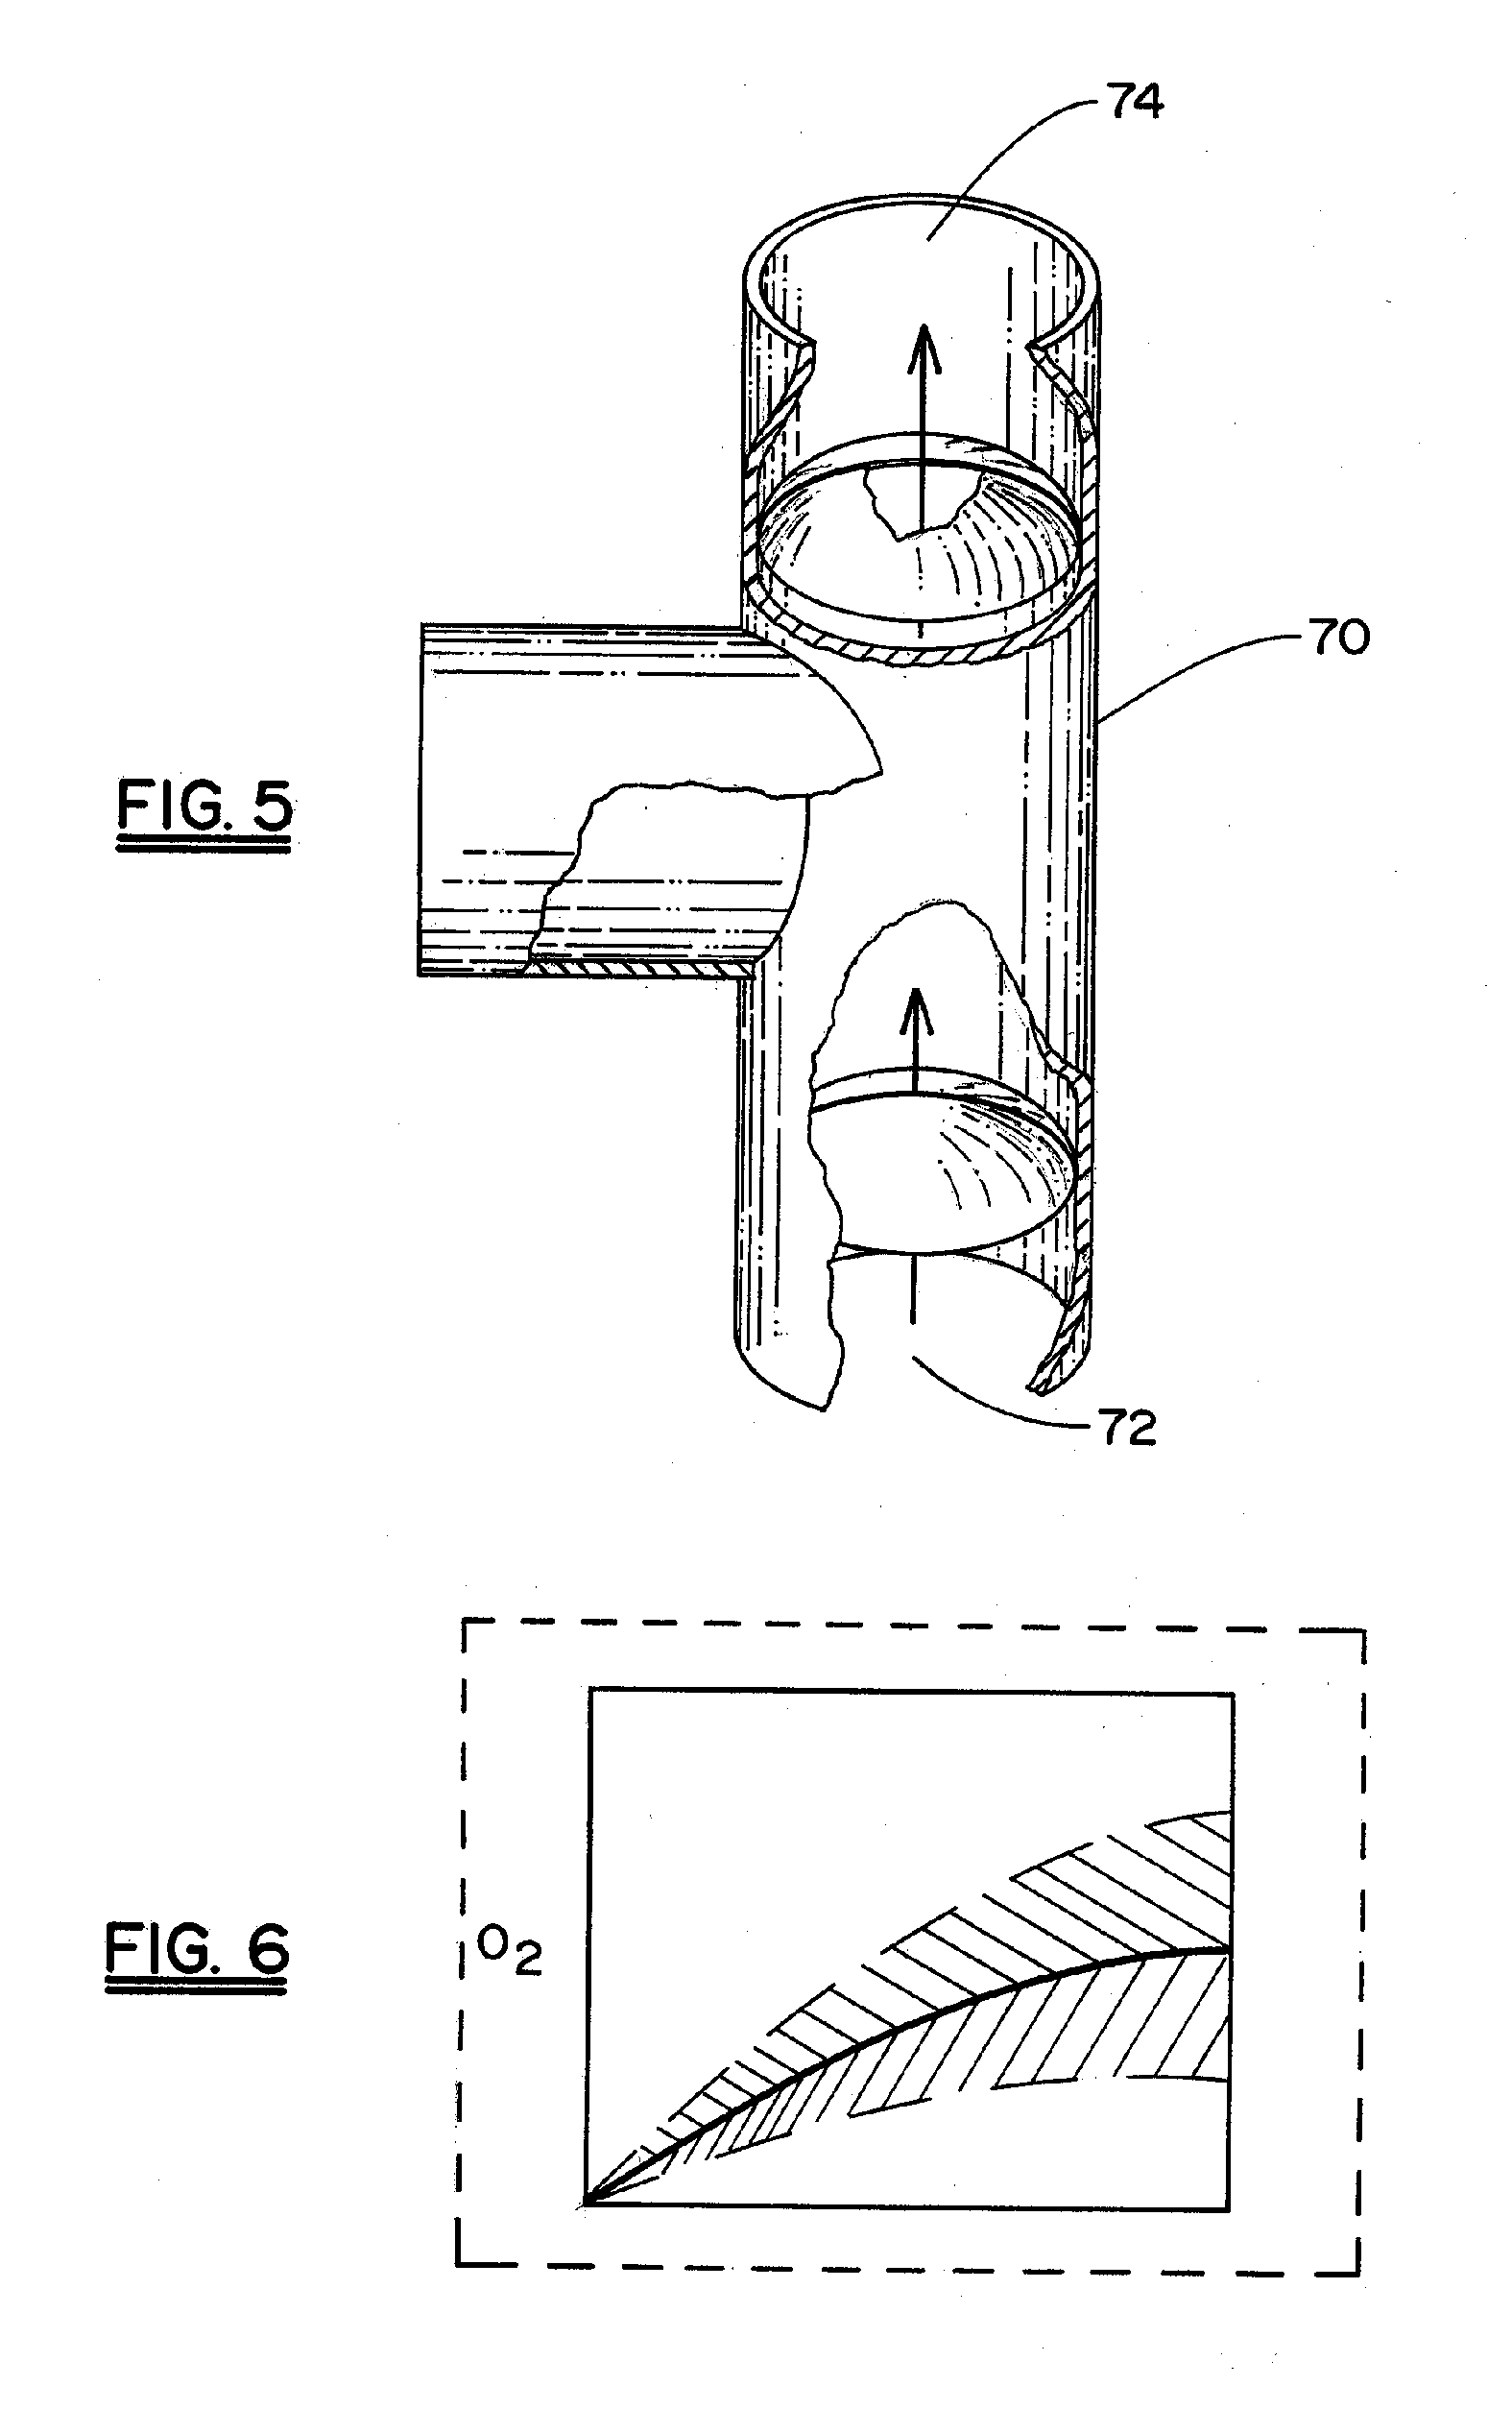 Non-Invasive Device and Method For the Diagnosis of Pulmonary Vascular Occlusions